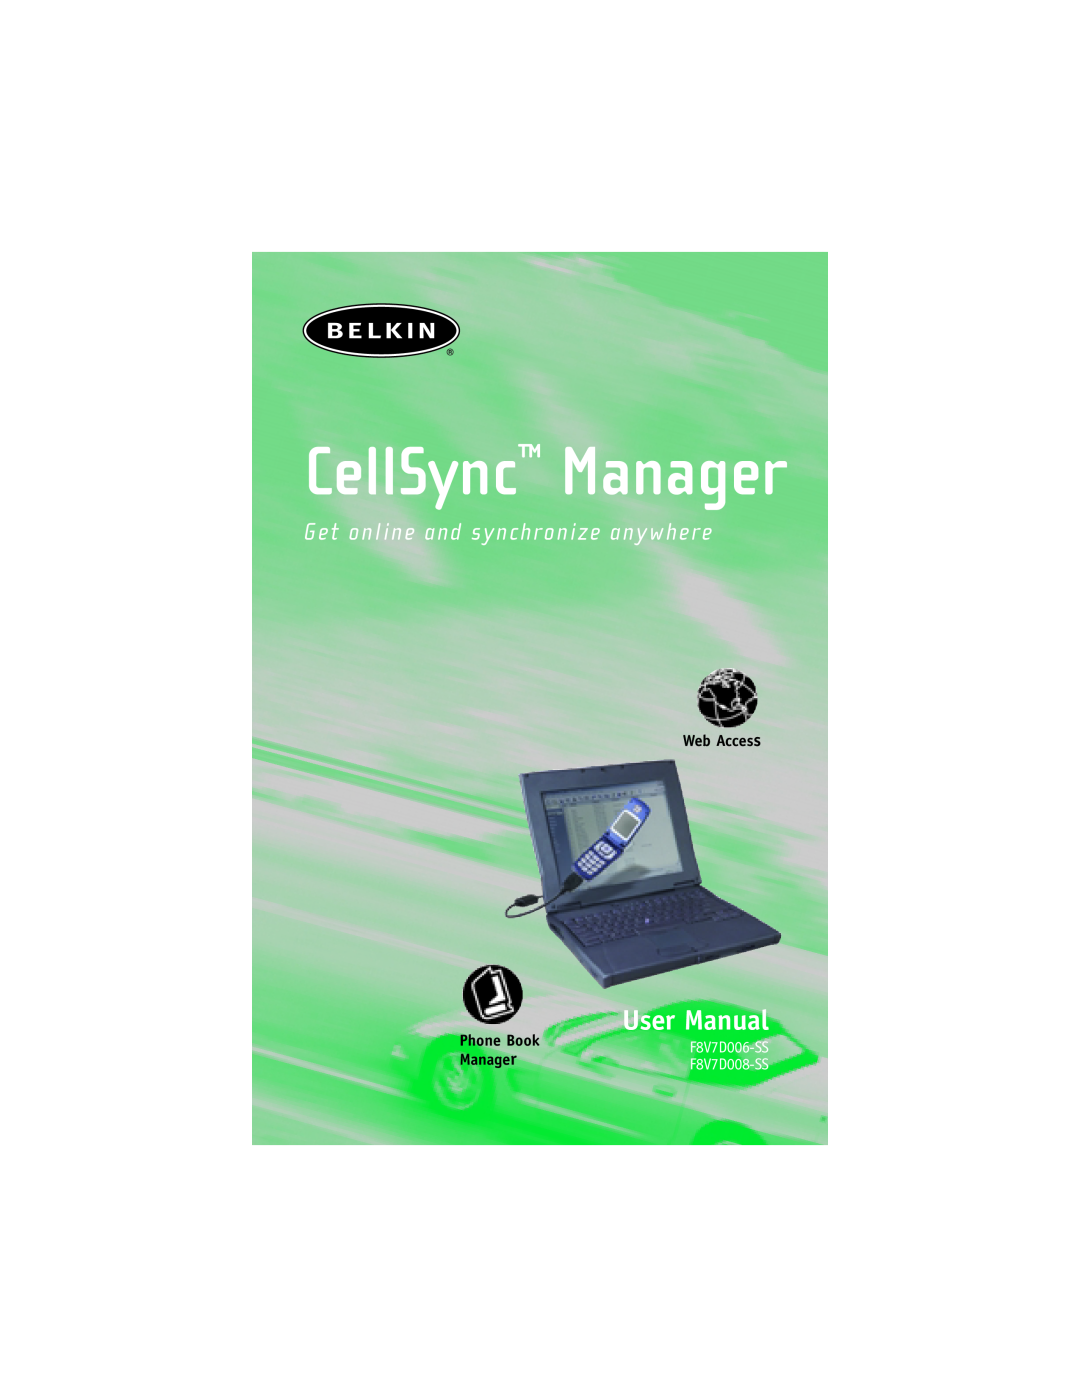 Belkin F8V7D006-SS user manual CellSync Manager, Get online and synchronize anywhere, User Manual, Phone Book, Manage r 